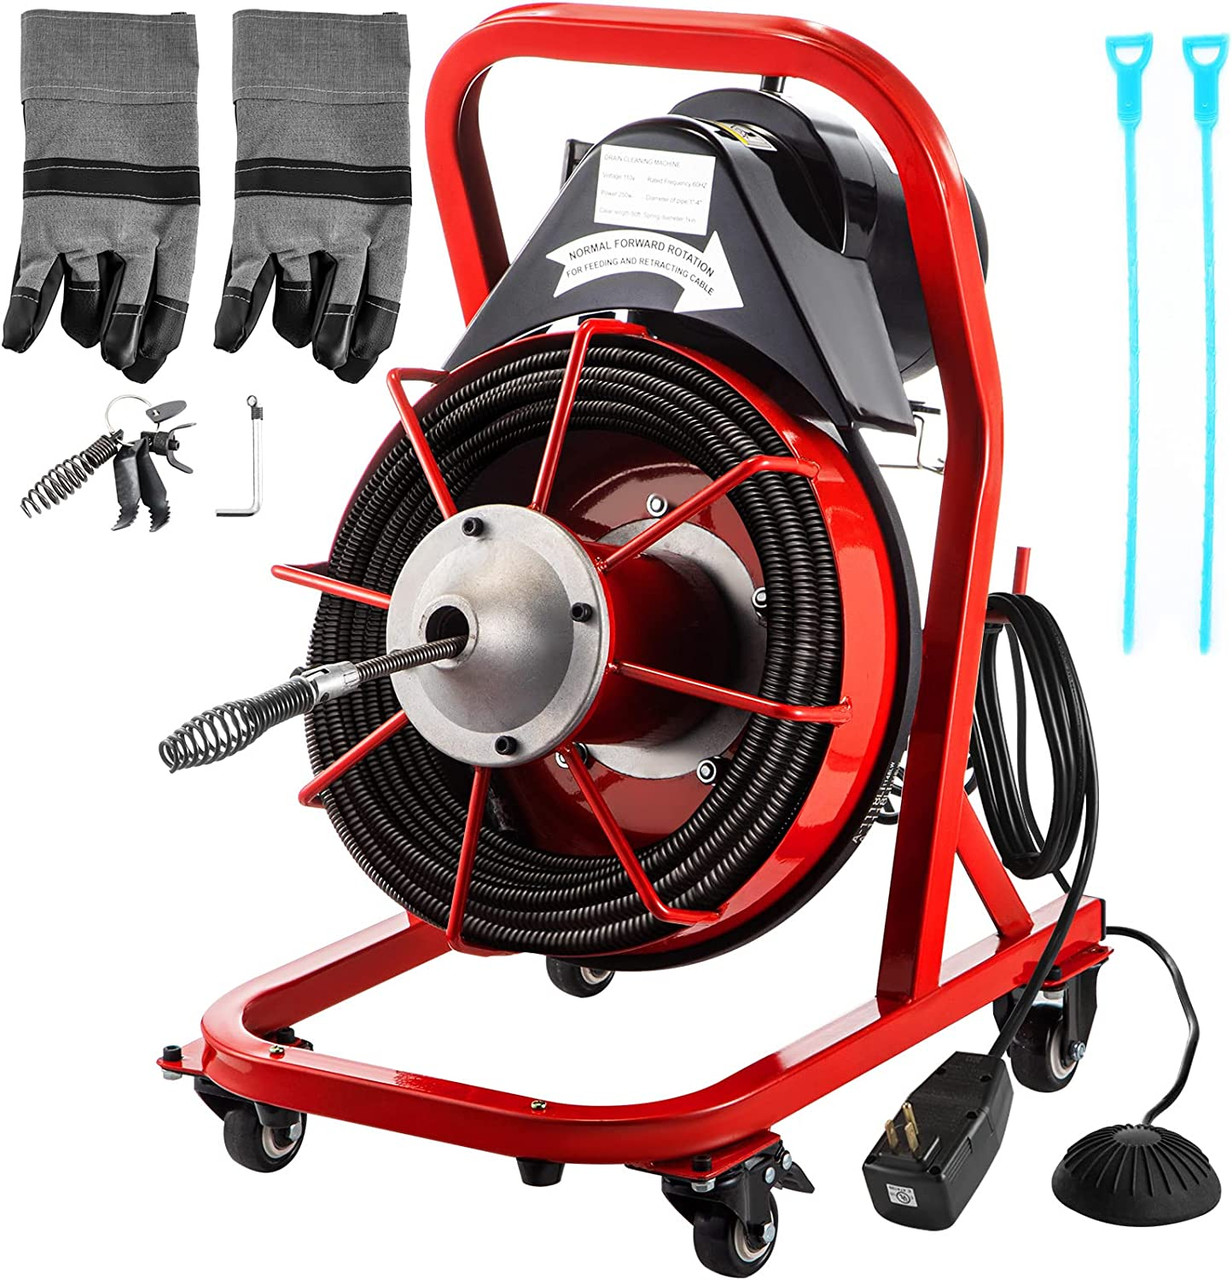 SAINSPEED 75Ft x 1/2 Inch Drain Cleaner Machine, Auto-feed Electric Drain  Auger Professional for 2 to 4 Inch Pipes, with 6 Cutters, Glove, Drain Auger  Cleaner Sewer Snake 